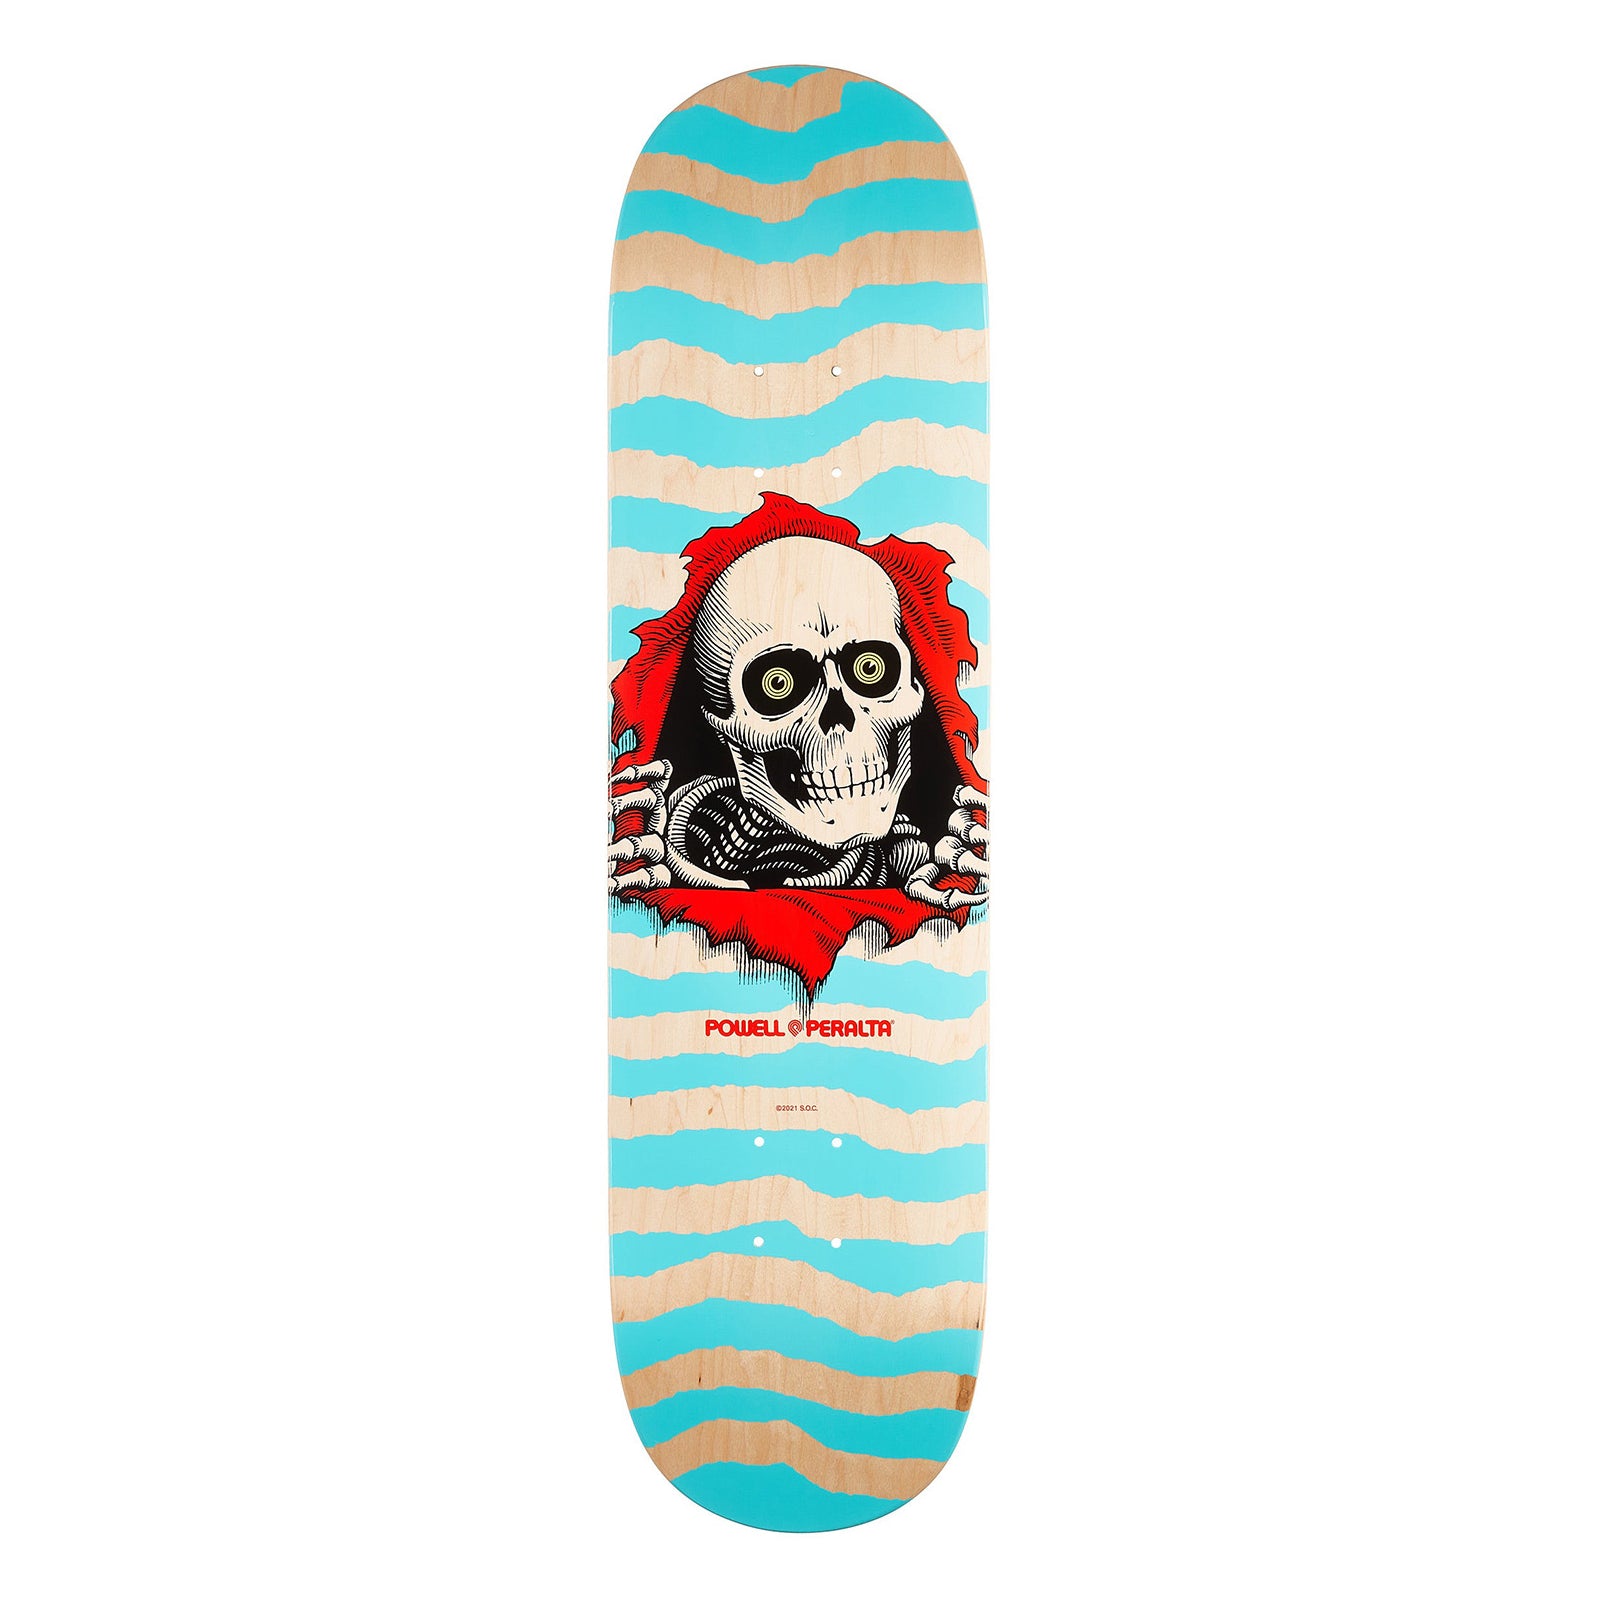 Powell Peralta - PS Ripper Deck 8.0 x 31.45 Inch - Turquoise